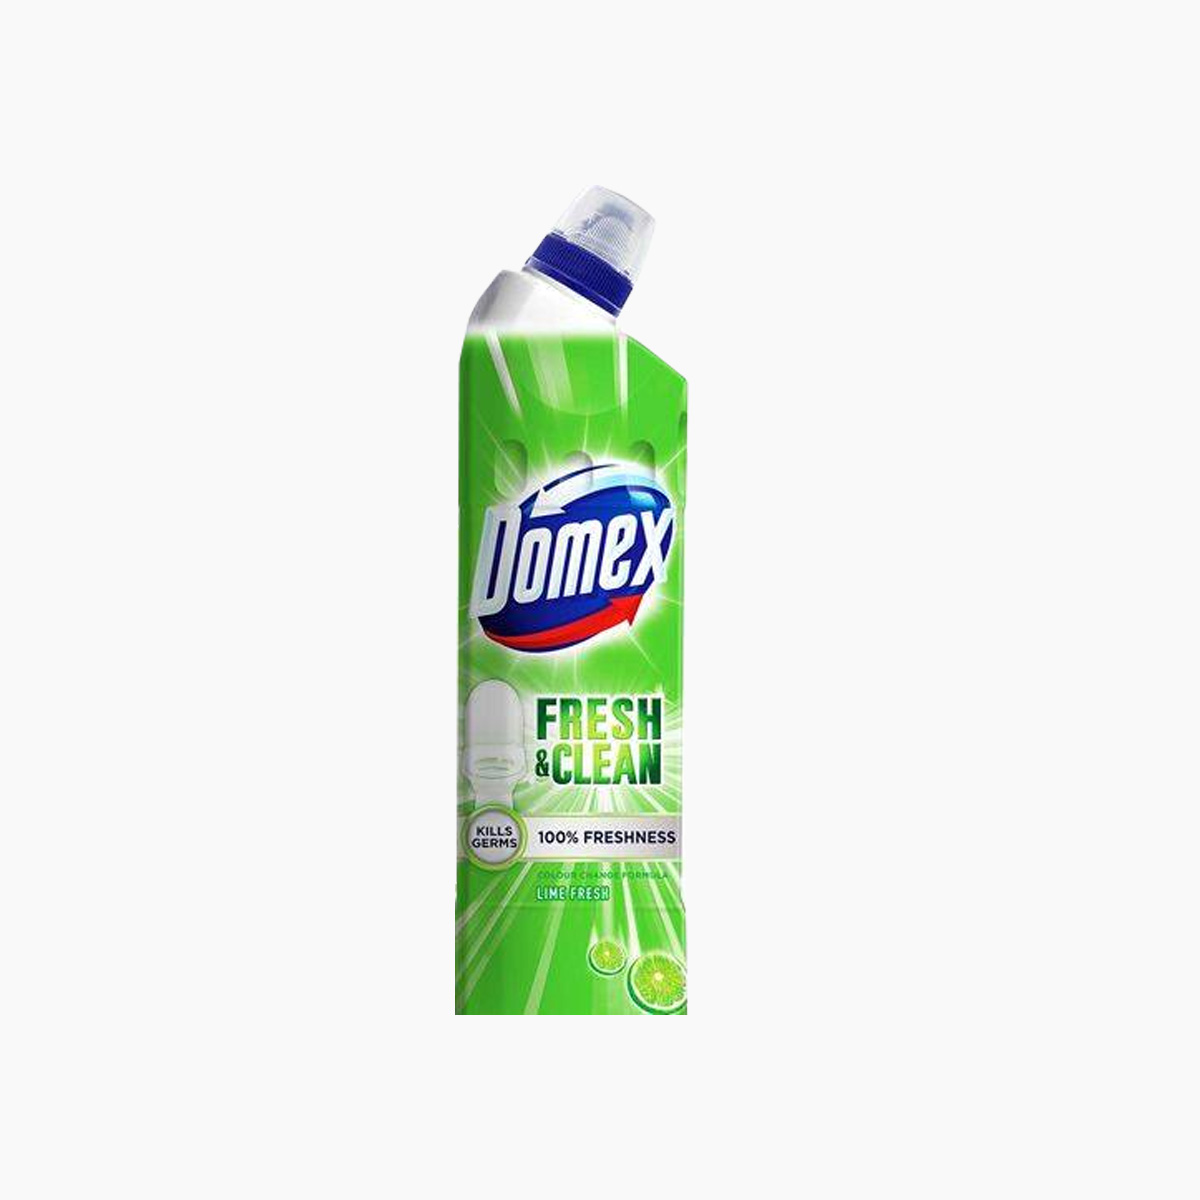 Domex Toilet Cleaner – Lime Fresh, 750 ml